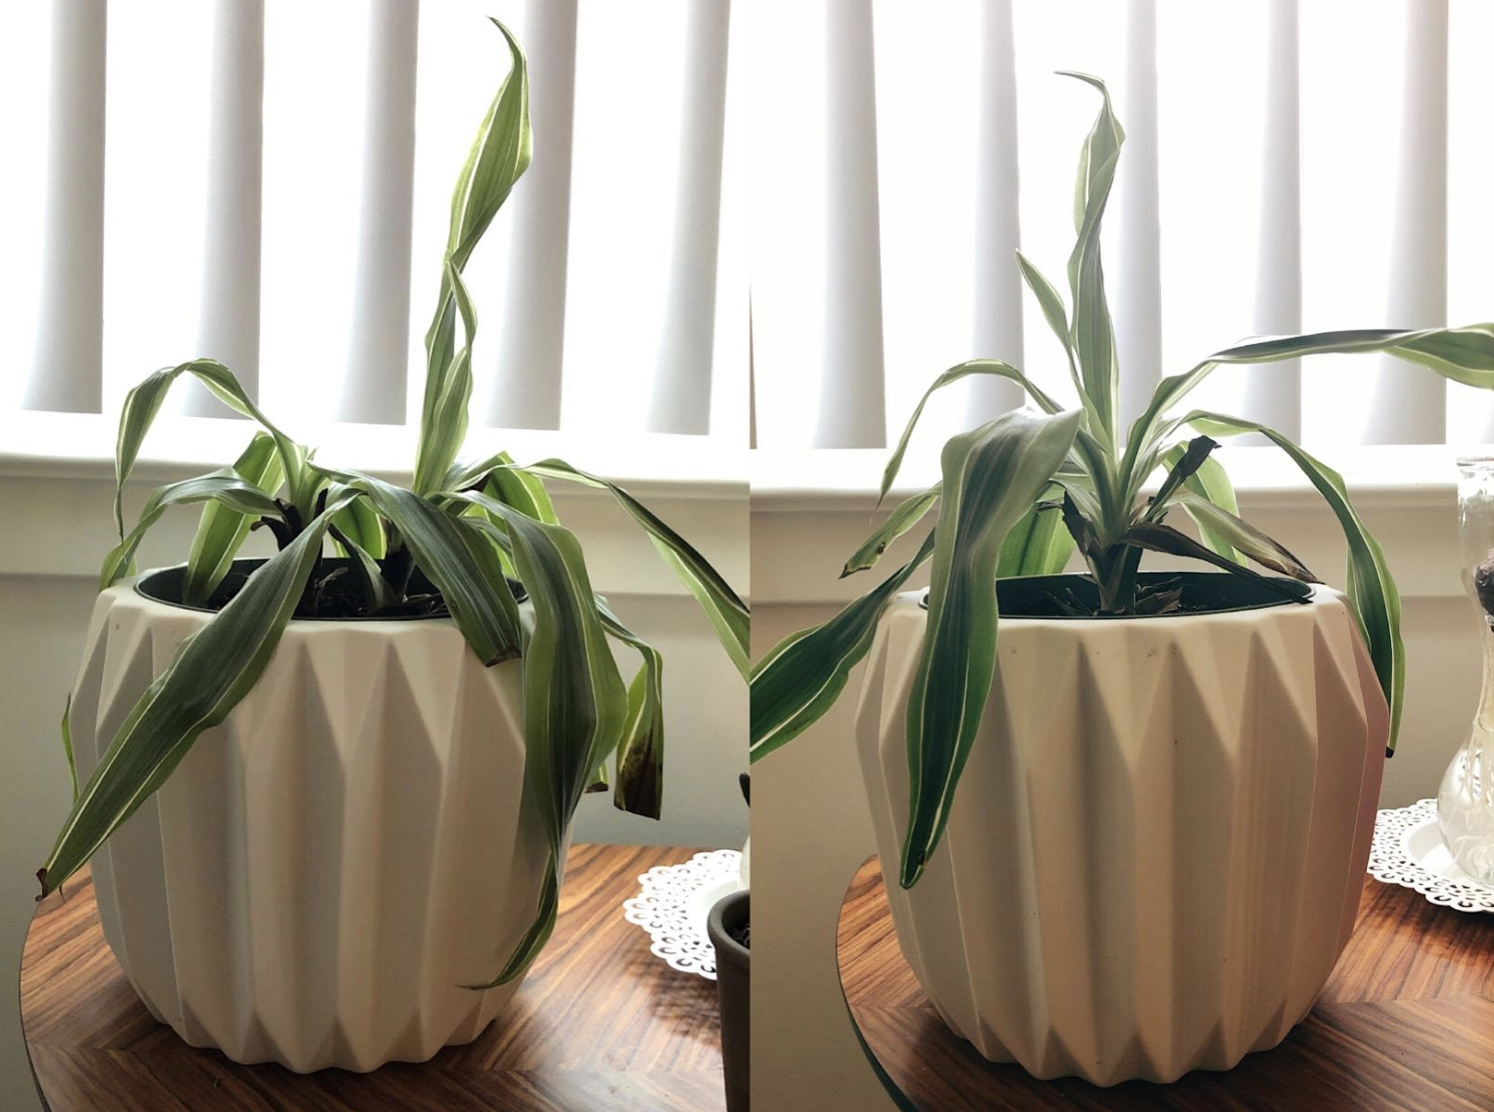 on the left, plant looking wilted and on the right, the same plant growing 